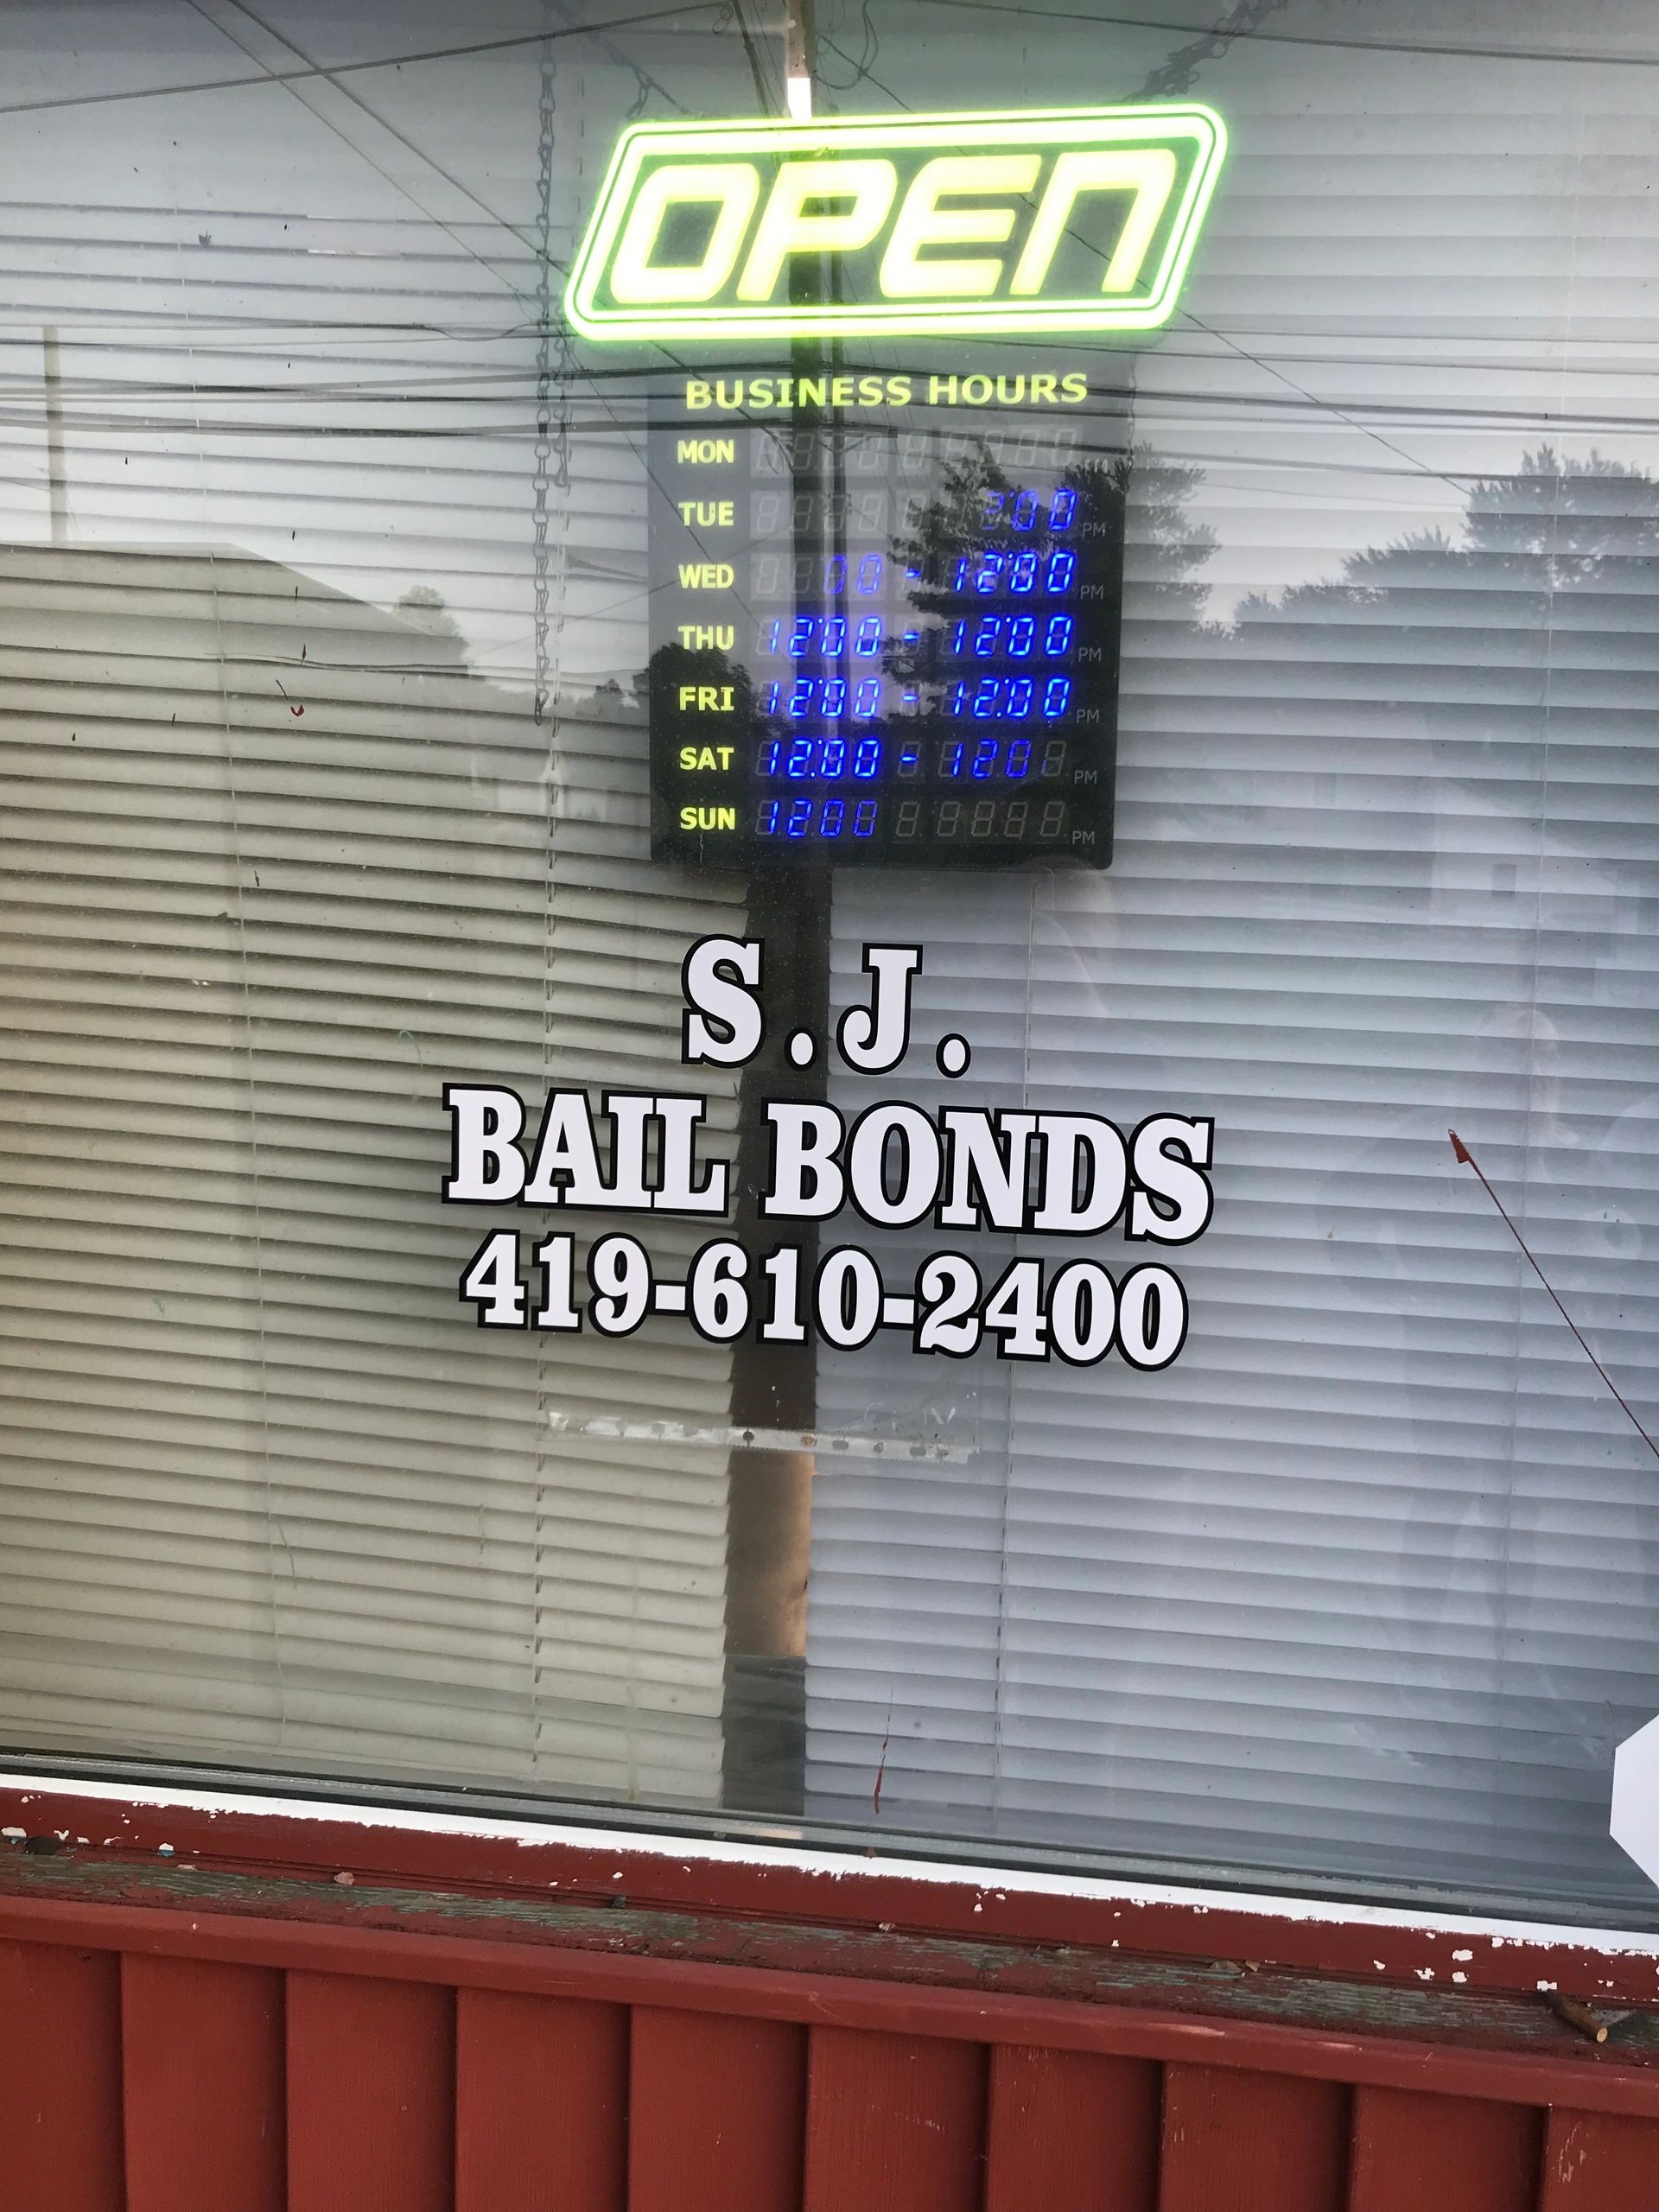 SJ Bail Bonds in Lima Ohio.  Call 419-610-2400 for all your bail bond needs in Allen county.